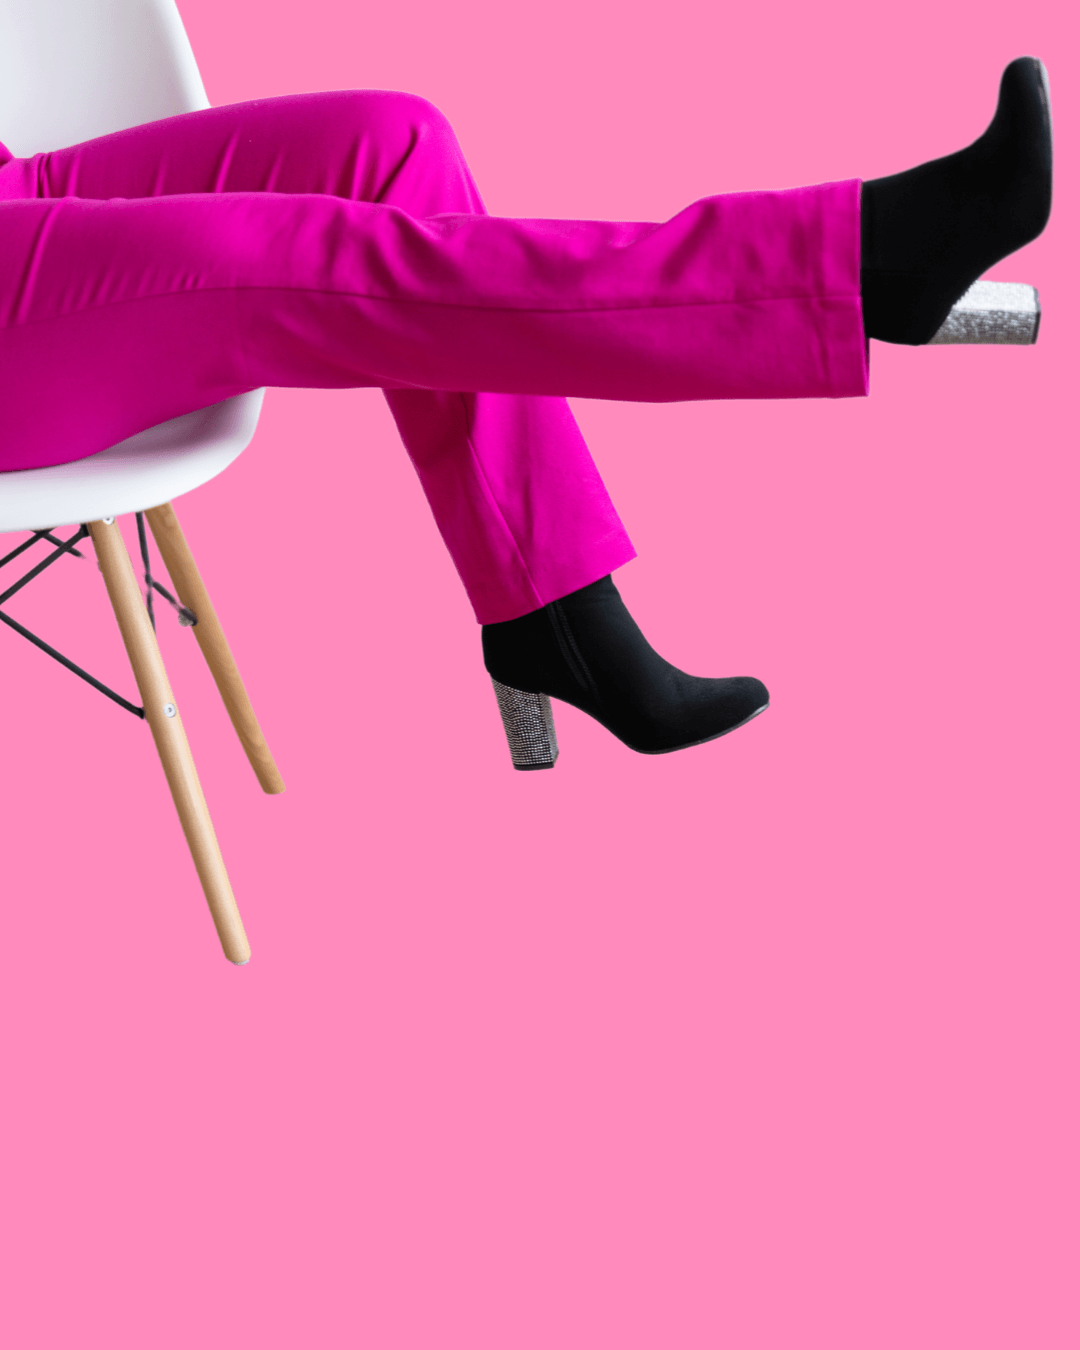 Woman sitting on chair in pink pants and black boots